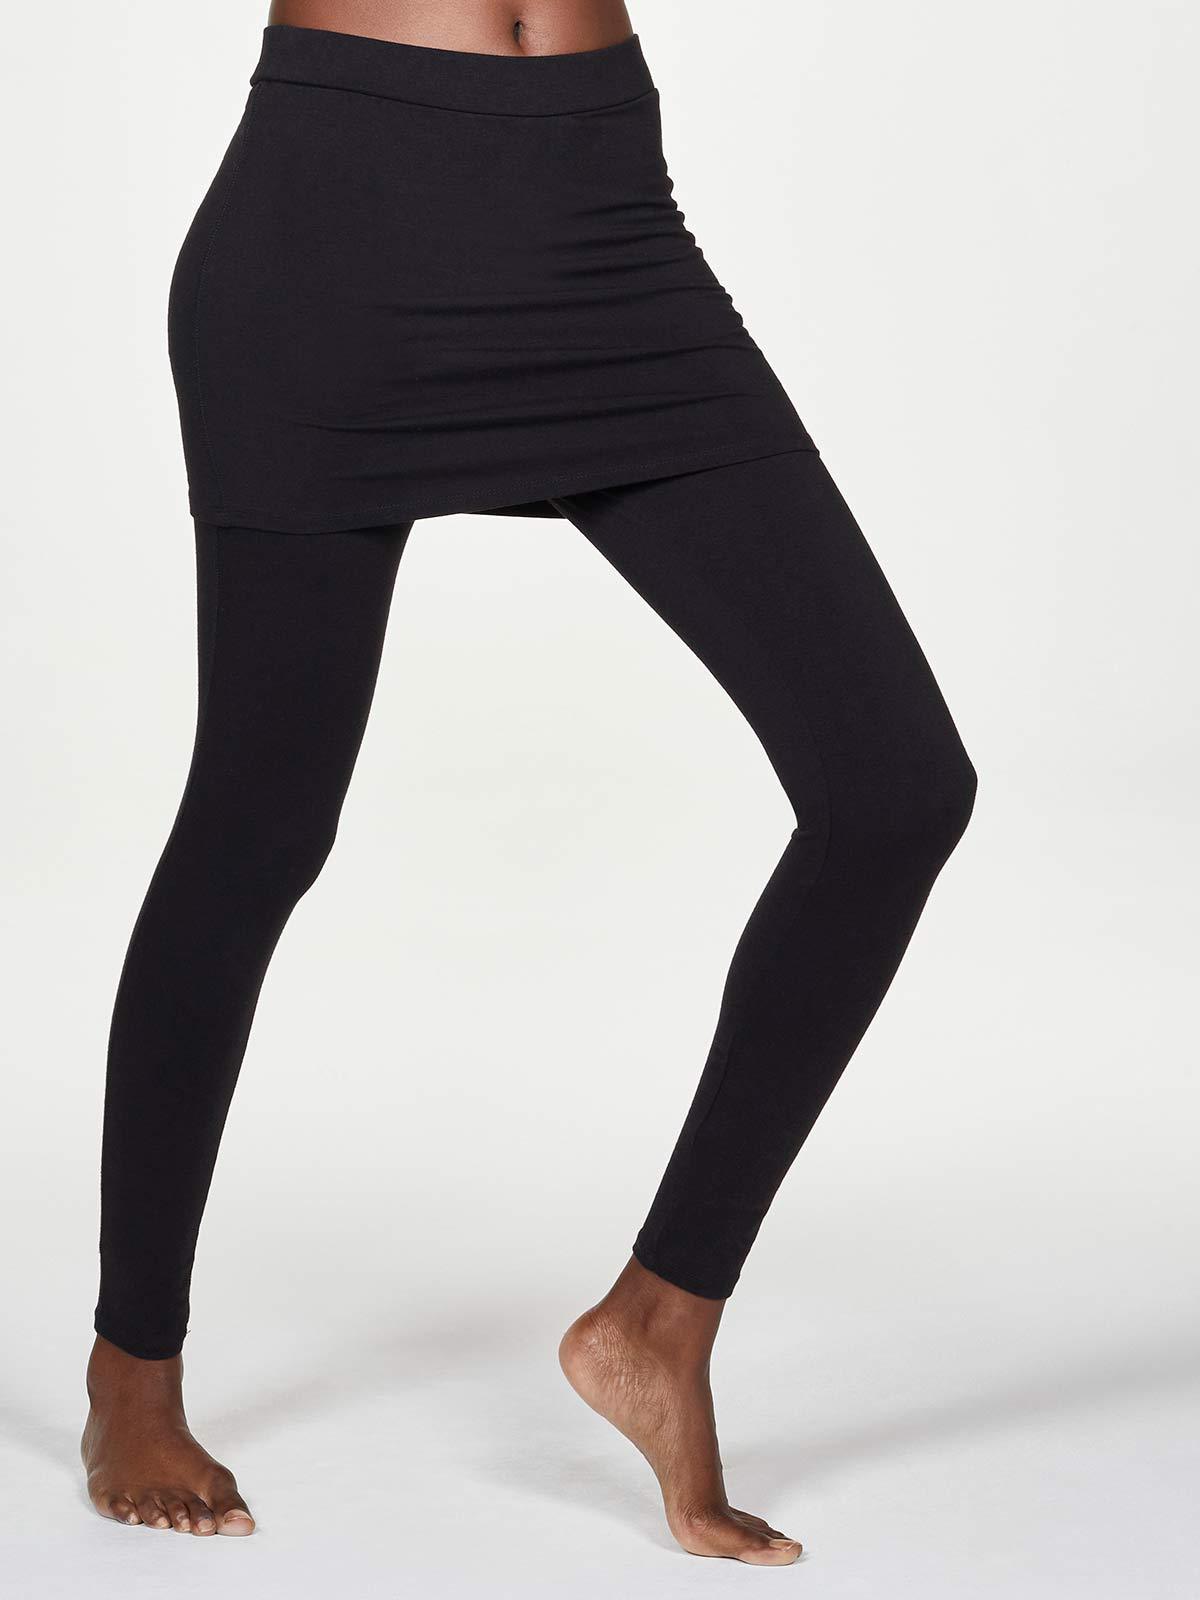 Activewear Circle Skirt Attached to Leggings, Black